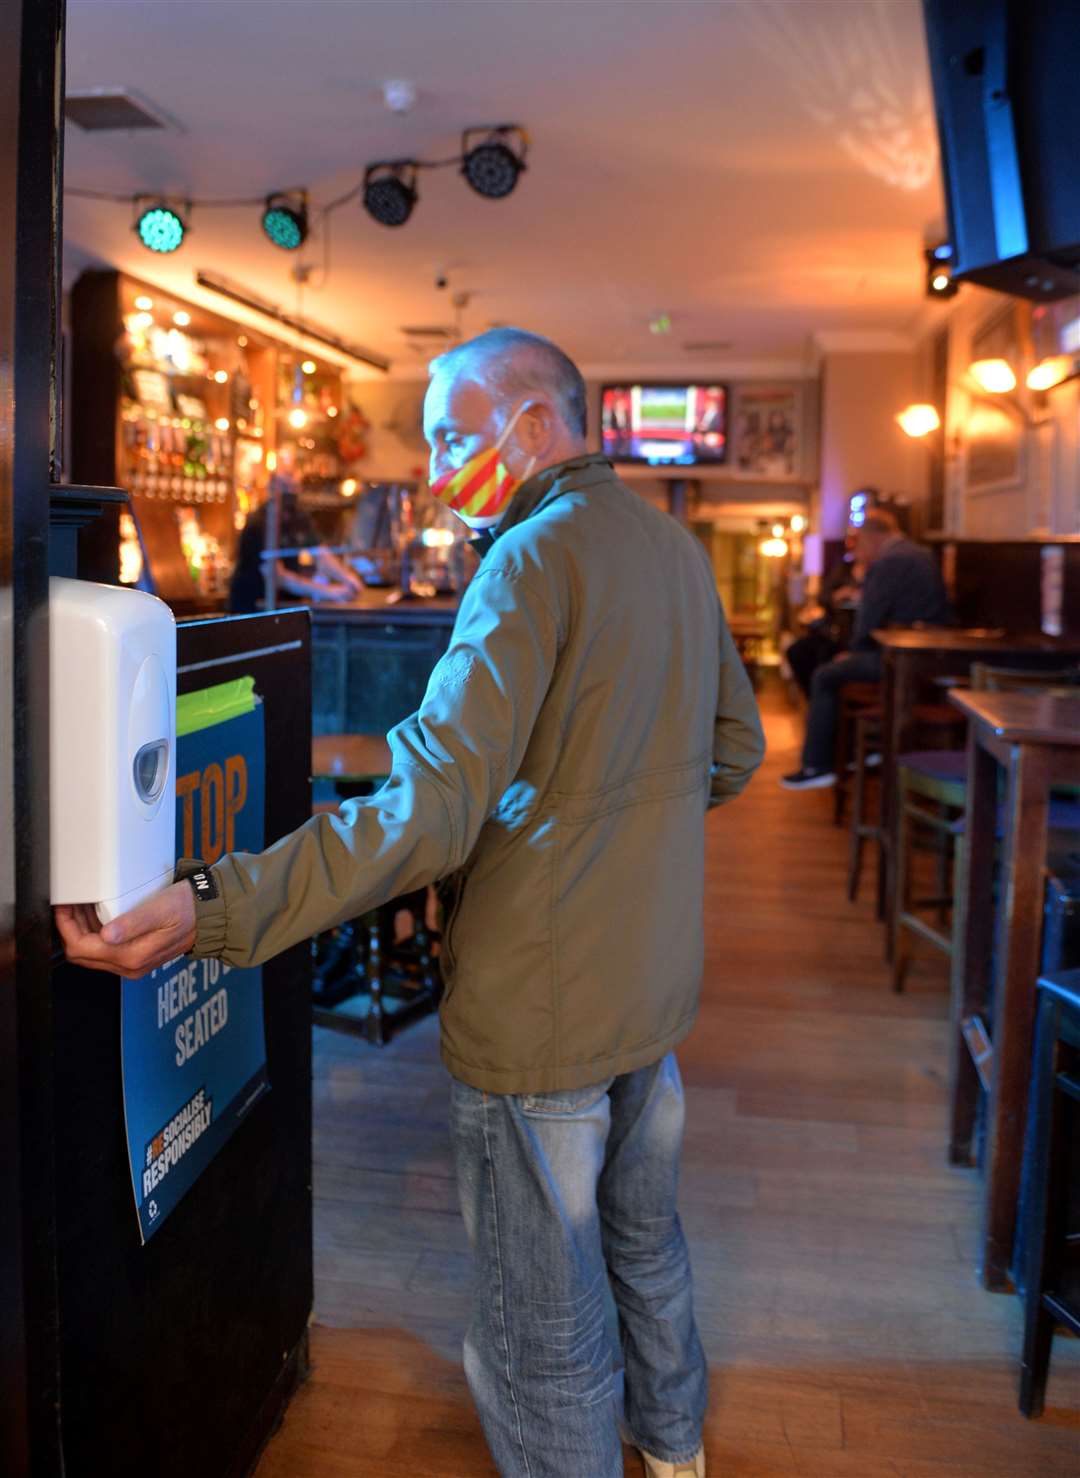 The Gellions, like most clubs and venues, has invested in measures to keep its customers safe.